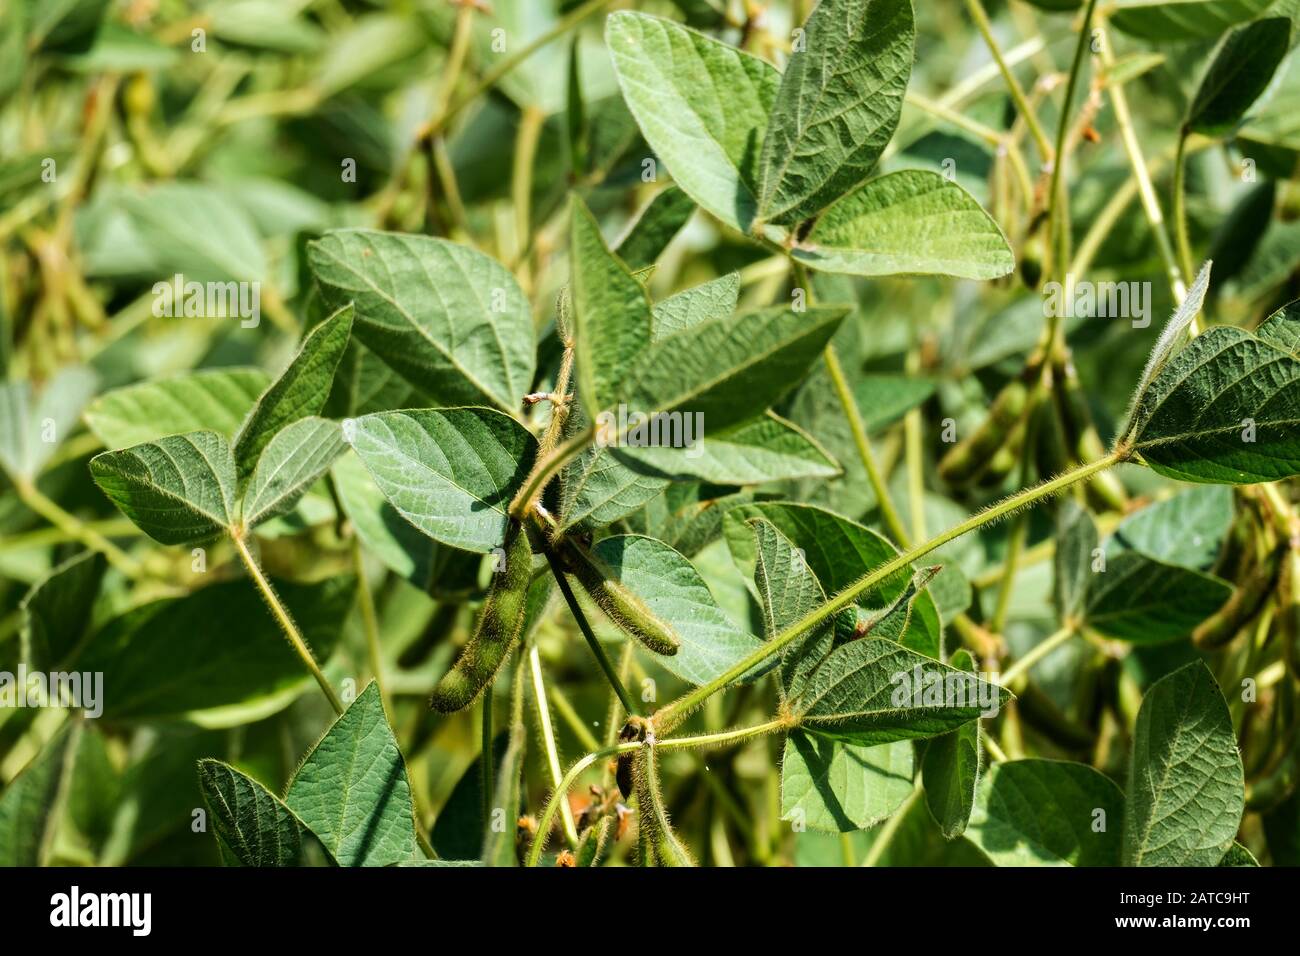 Soybeans in pods grow on an agricultural field (Glycine max) Stock Photo